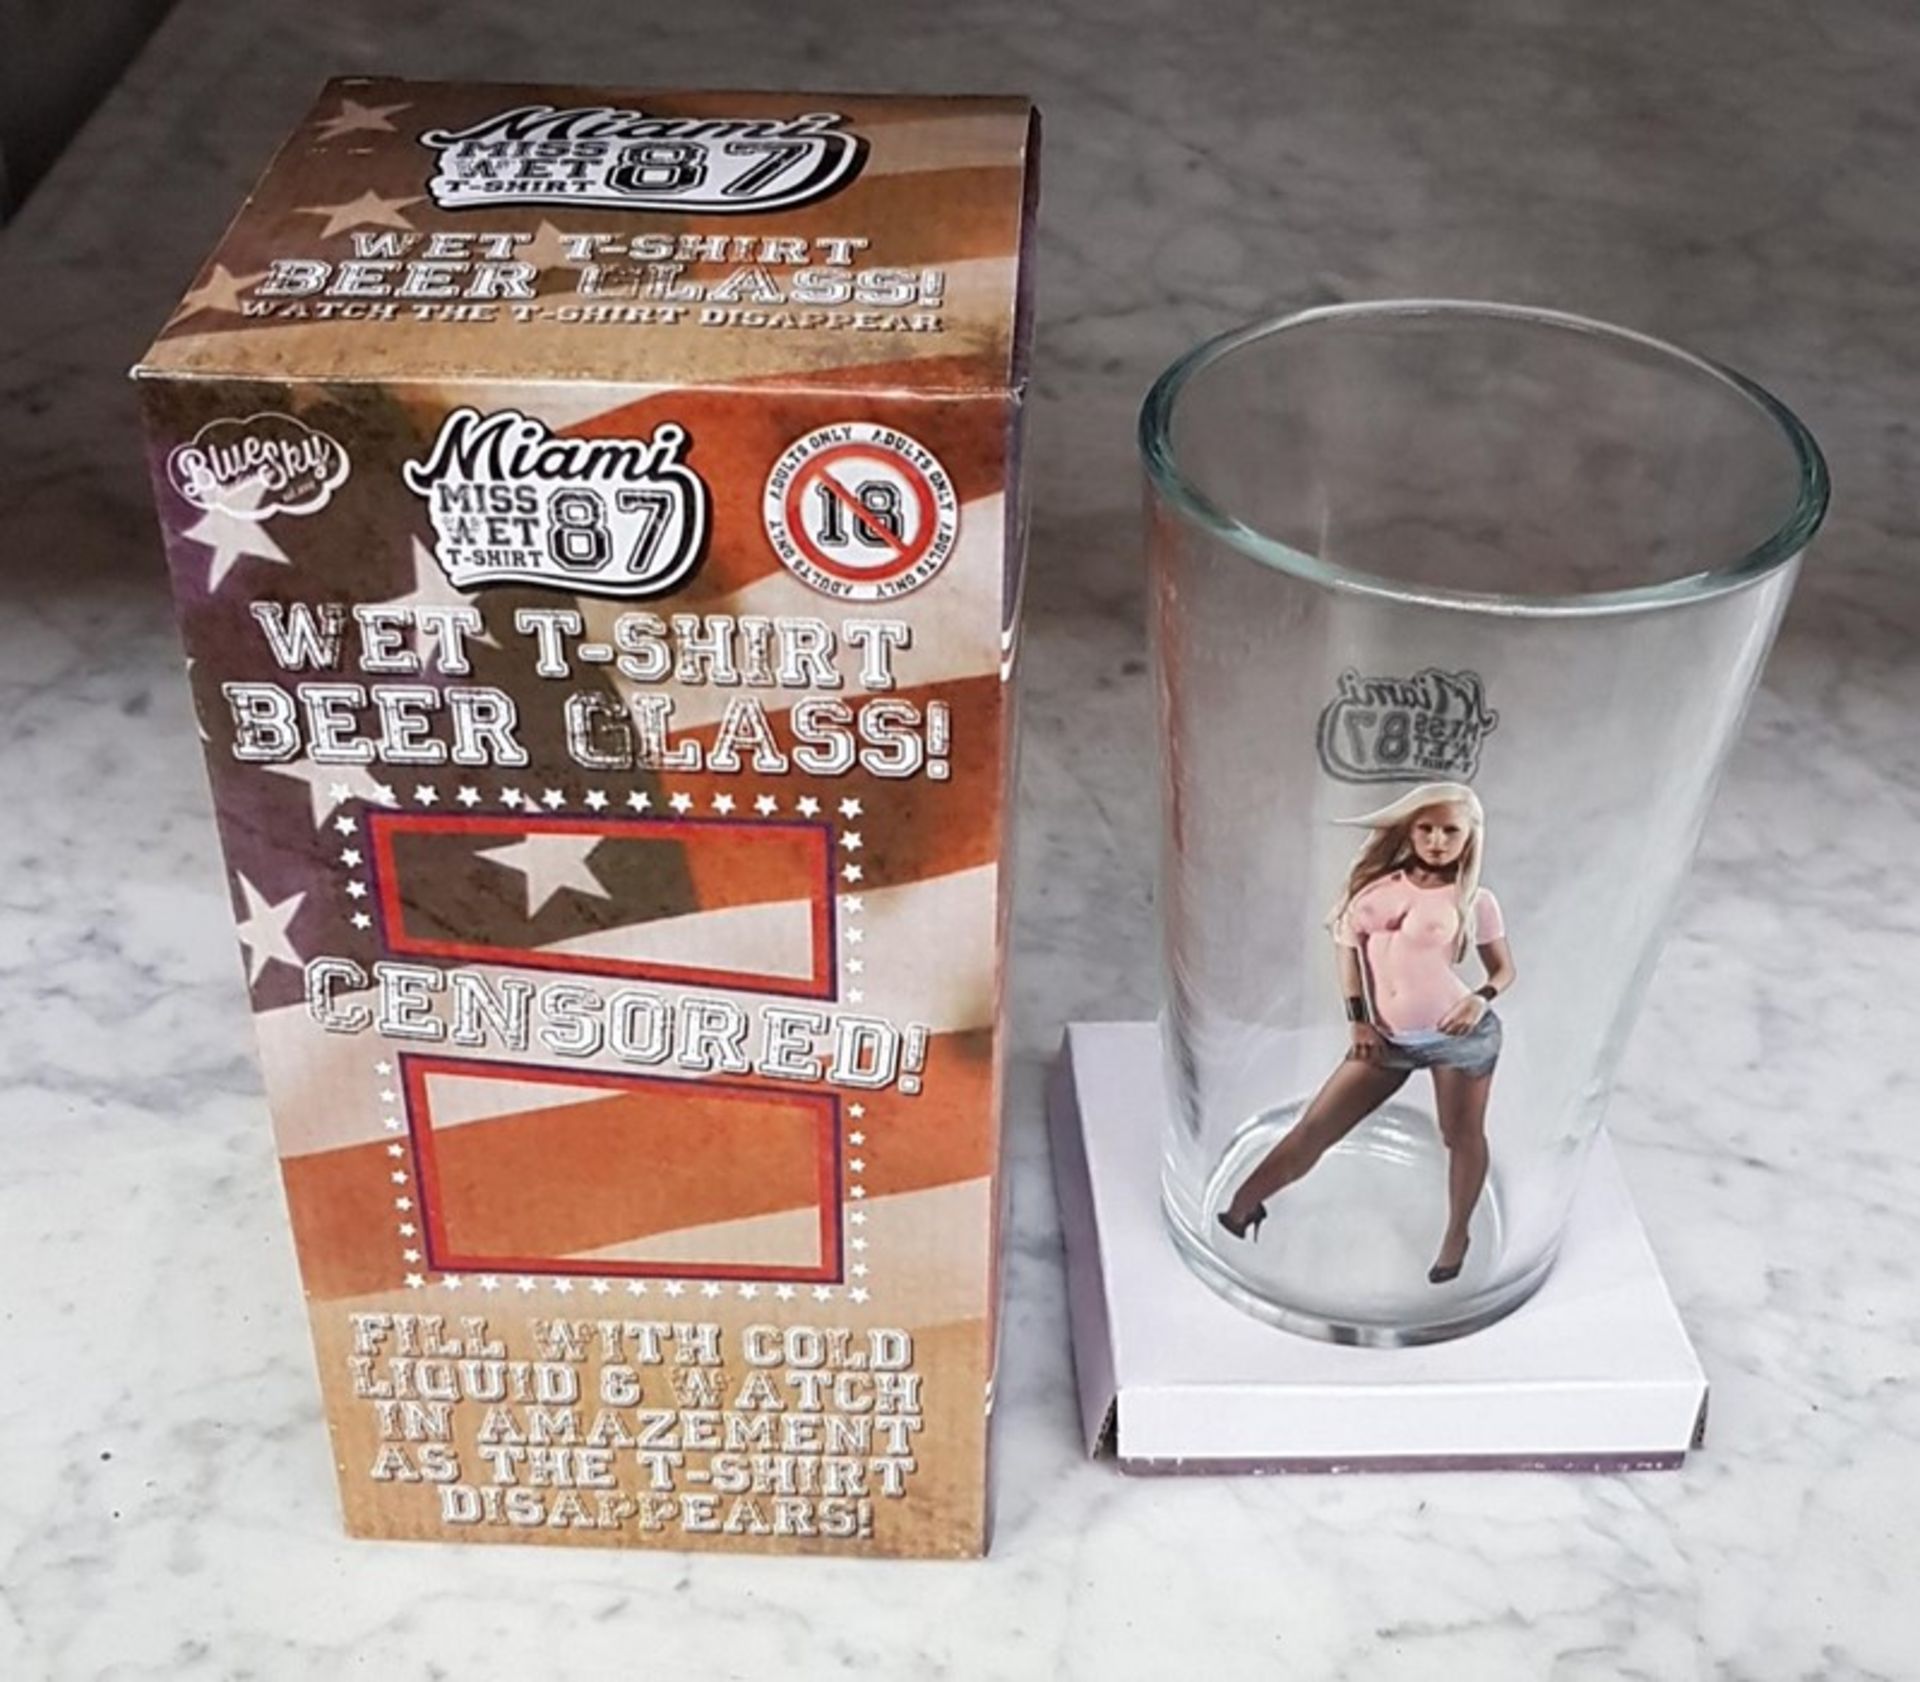 1 BOX OF 6 AS NEW MIAMI MISS WET T-SHIRT 87 BEER GLASS, FILL THE GLASS WITH LIQUID AND SEE THE T-